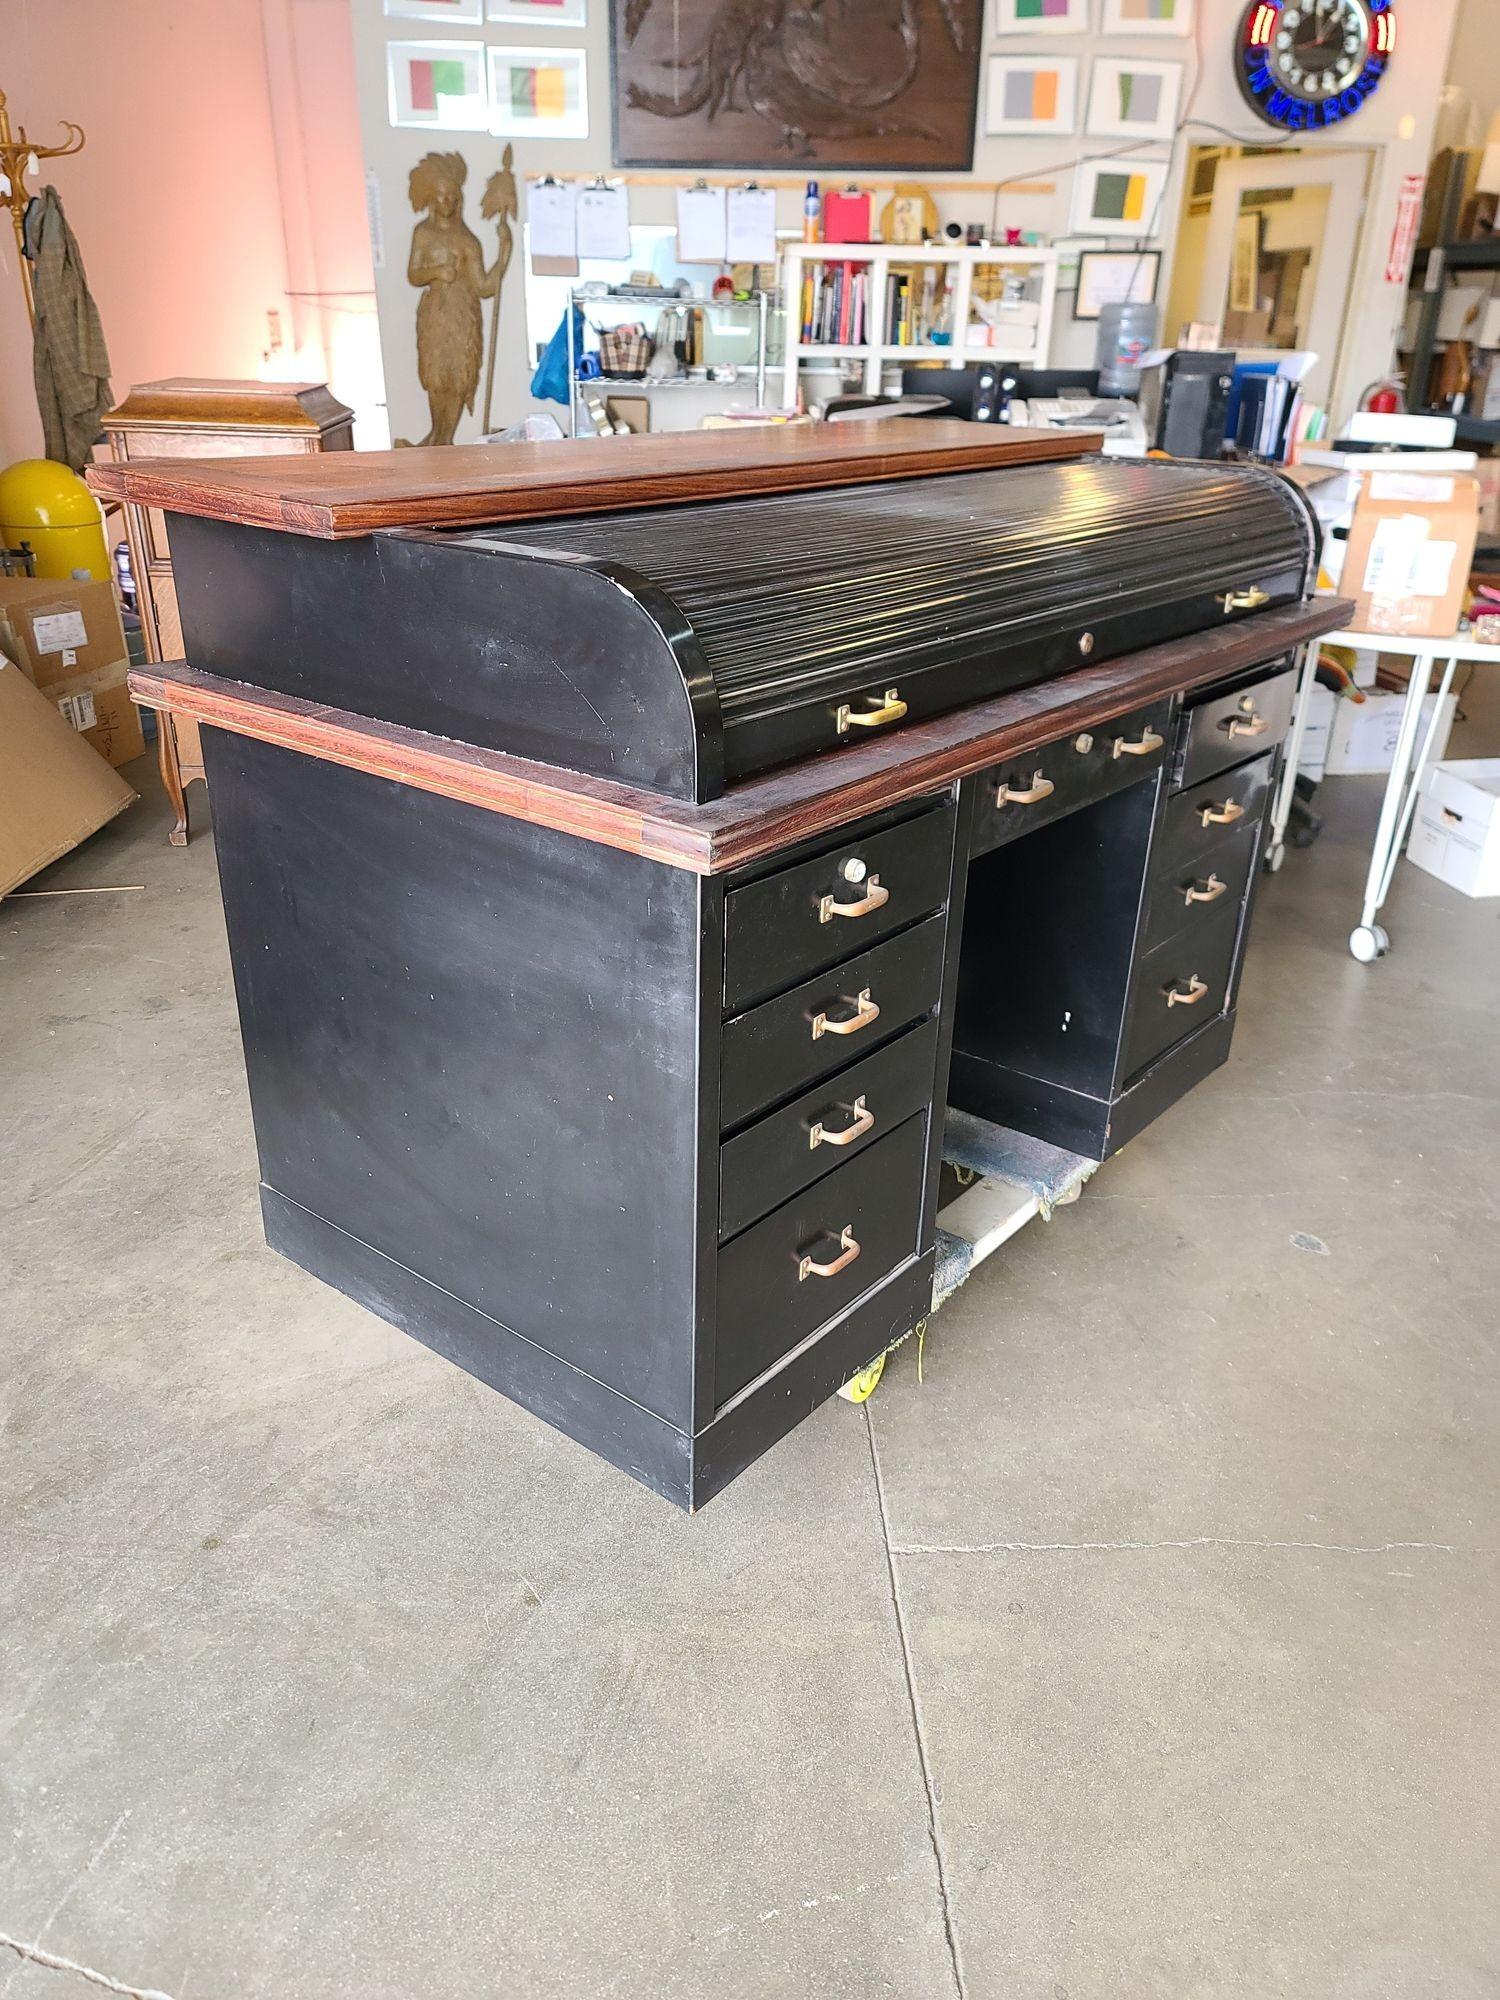 Large Roll Top Metal Tanker Desk w/ Brass Detailing In Excellent Condition For Sale In Van Nuys, CA